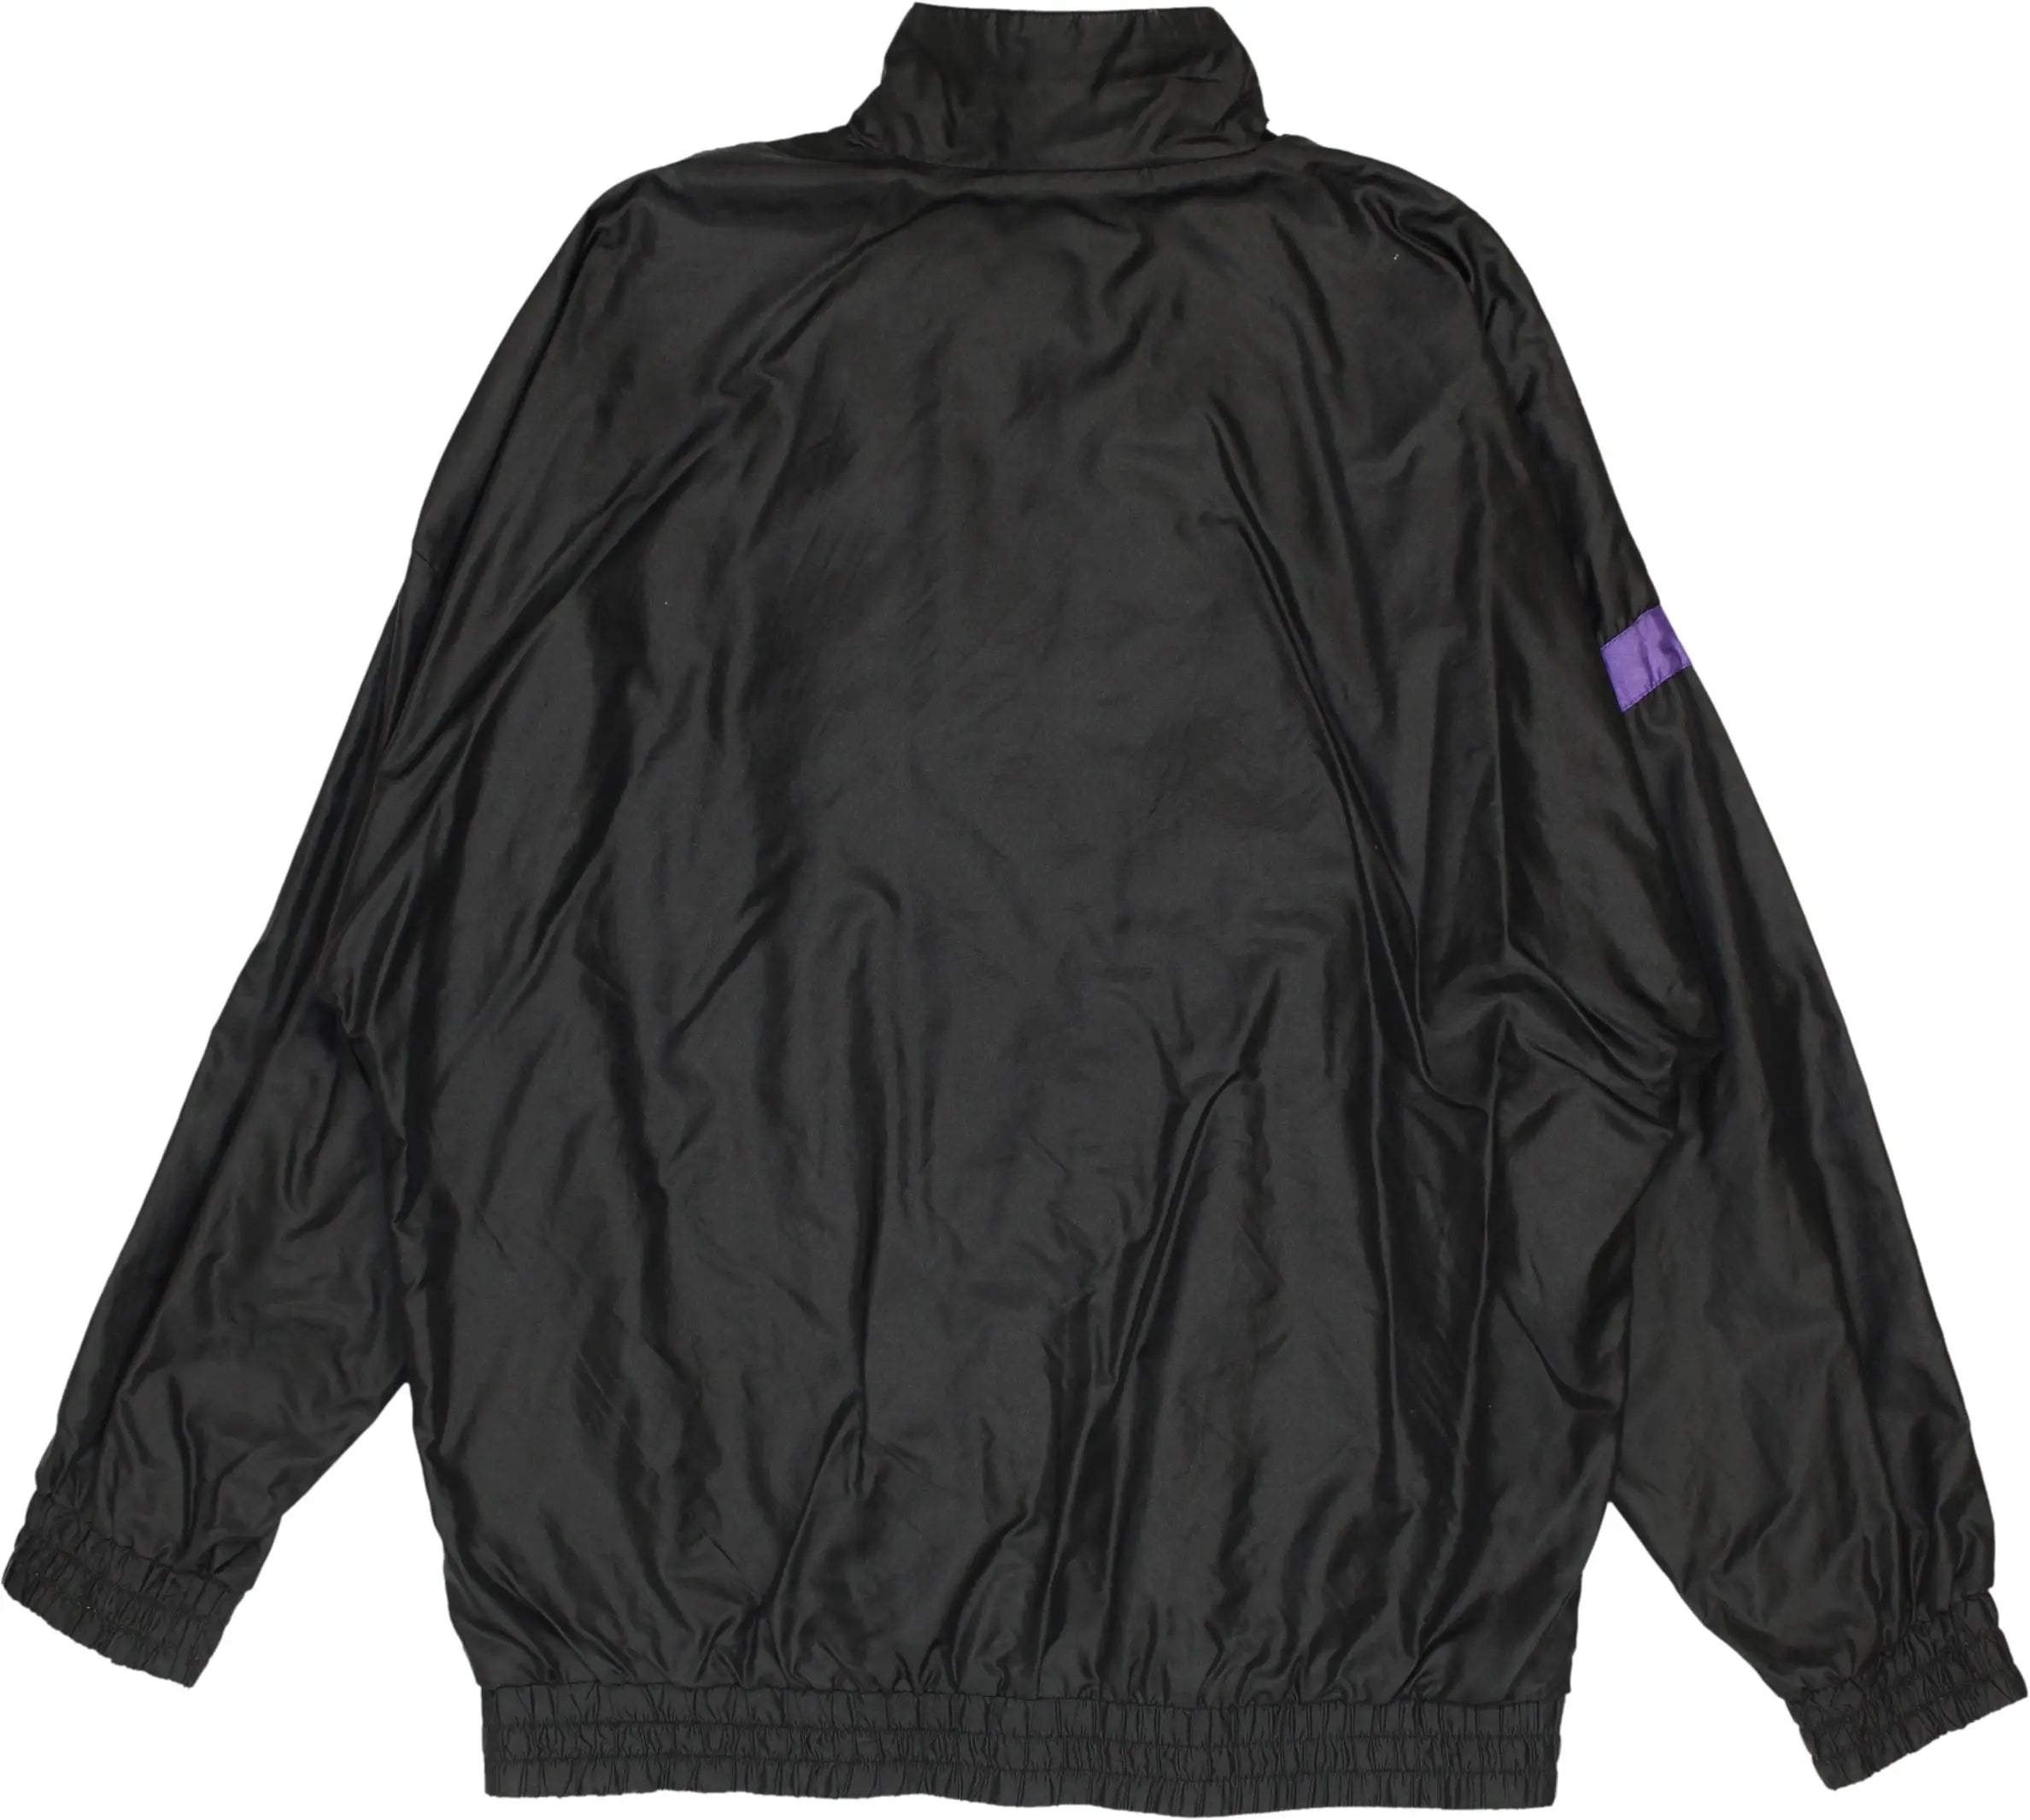 Adidas - 90s Windbreaker by Adidas- ThriftTale.com - Vintage and second handclothing